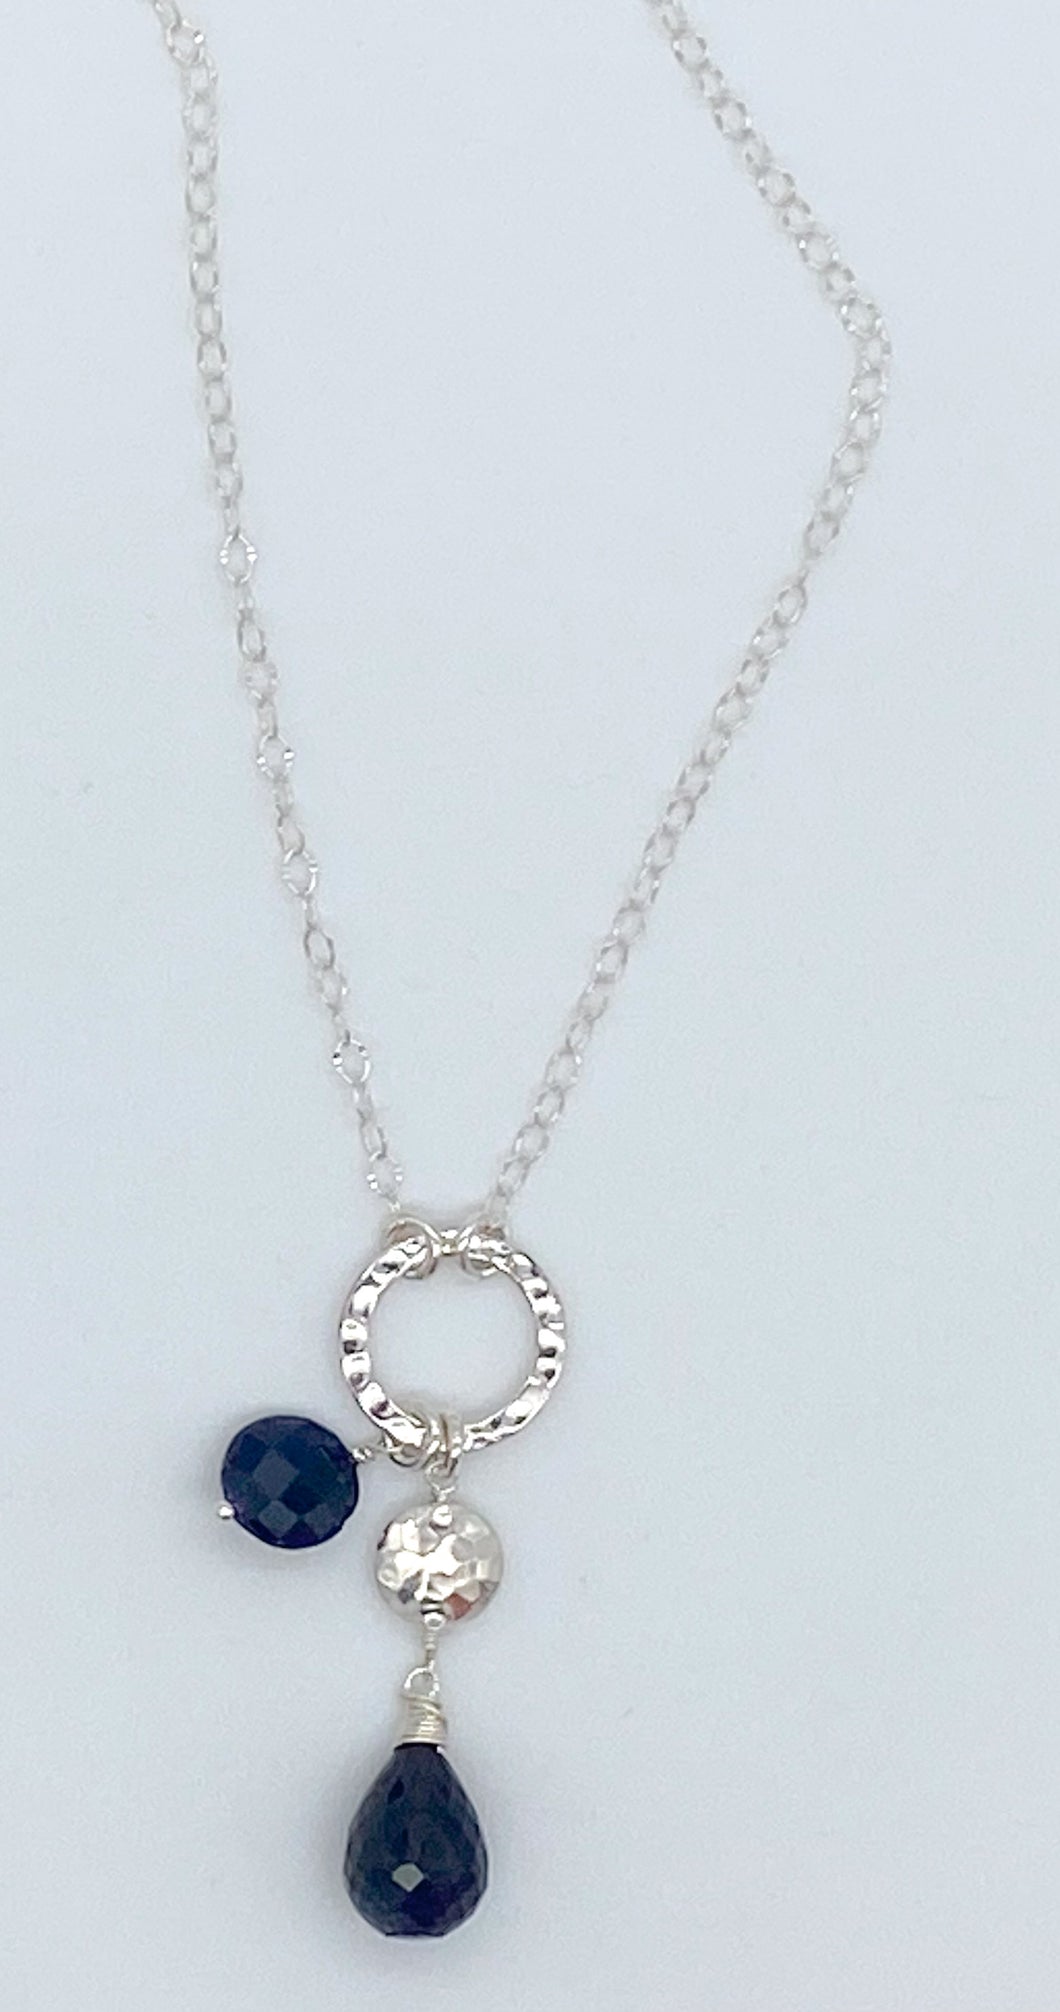 Sapphire and silver necklace